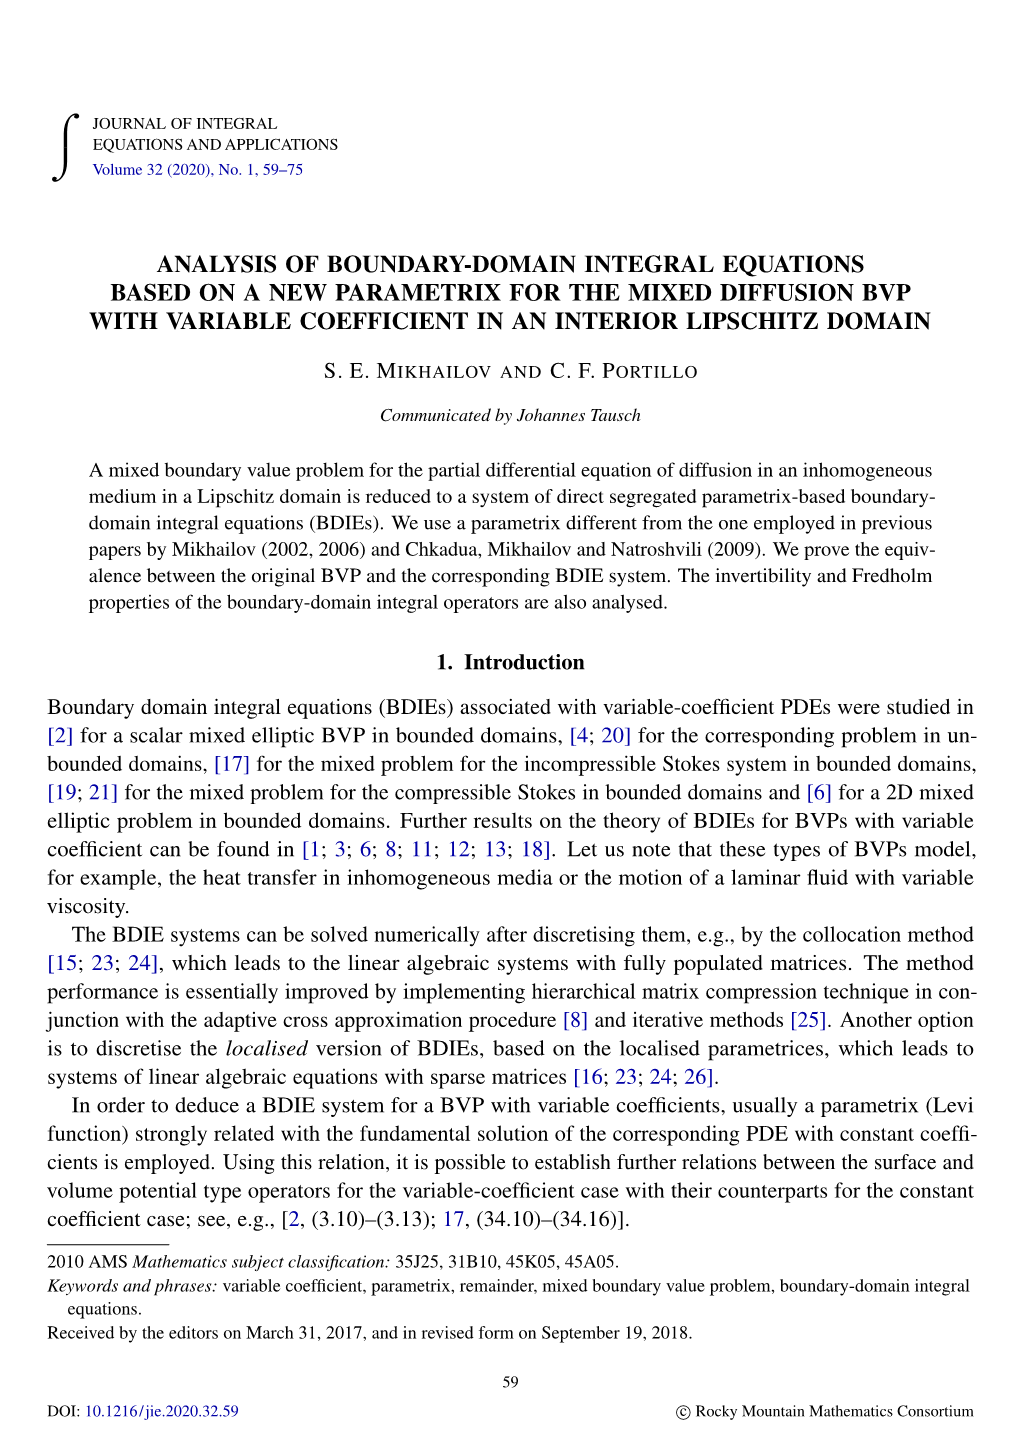 Analysis of Boundary-Domain Integral Equations Based on a New Parametrix for the Mixed Diffusion Bvp with Variable Coefficient in an Interior Lipschitz Domain